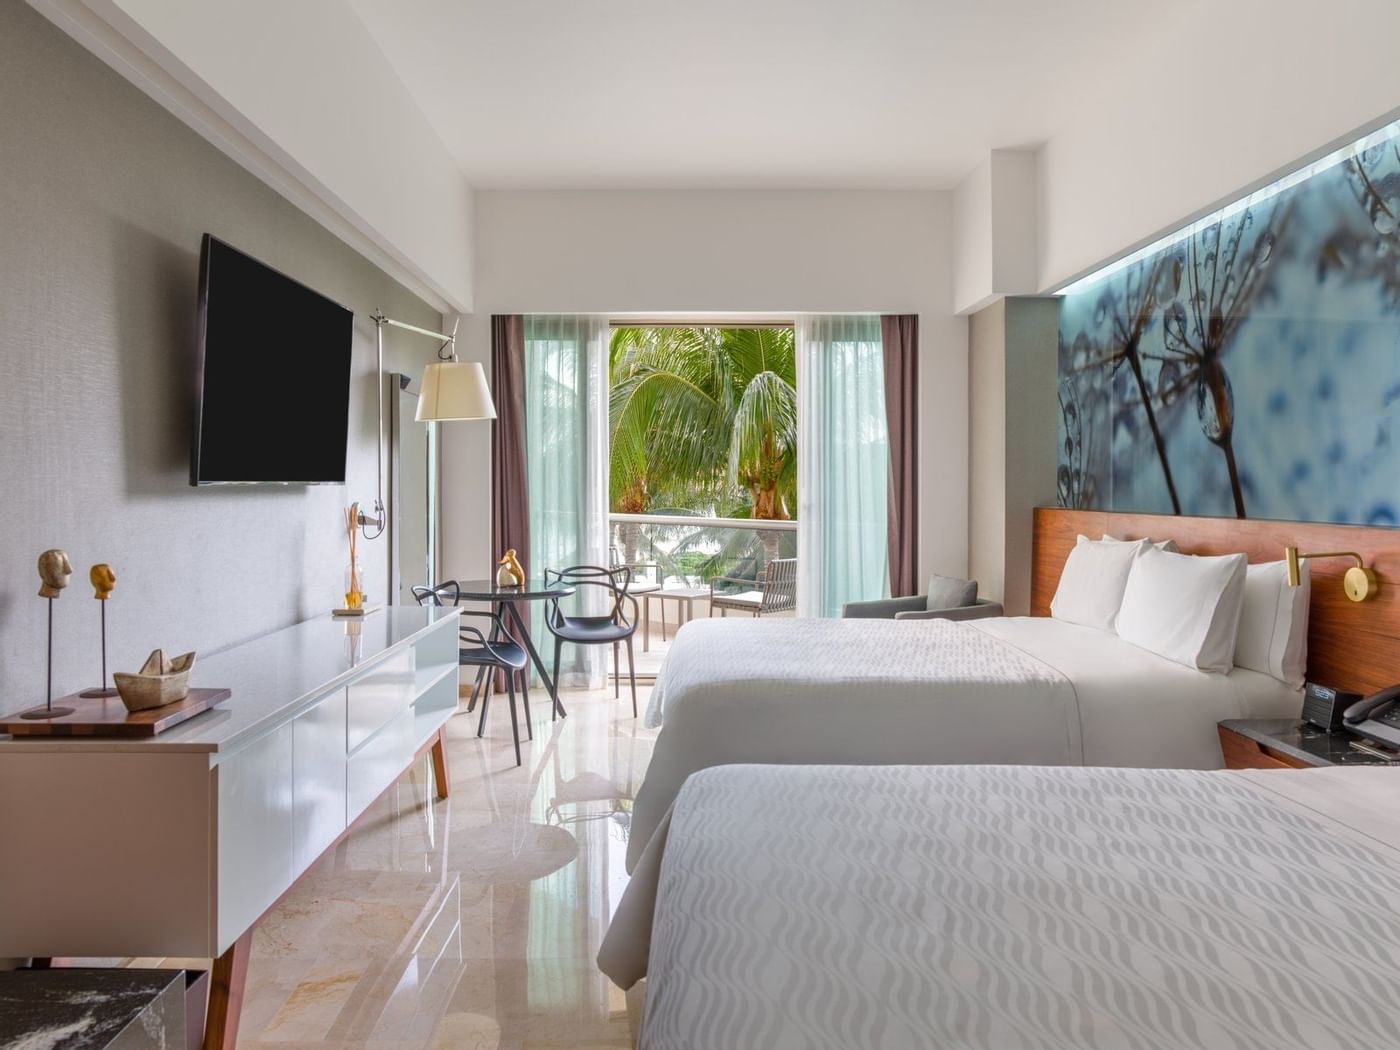 Premium Garden View with twin bed faced TV at Live Aqua Beach Resort Cancun